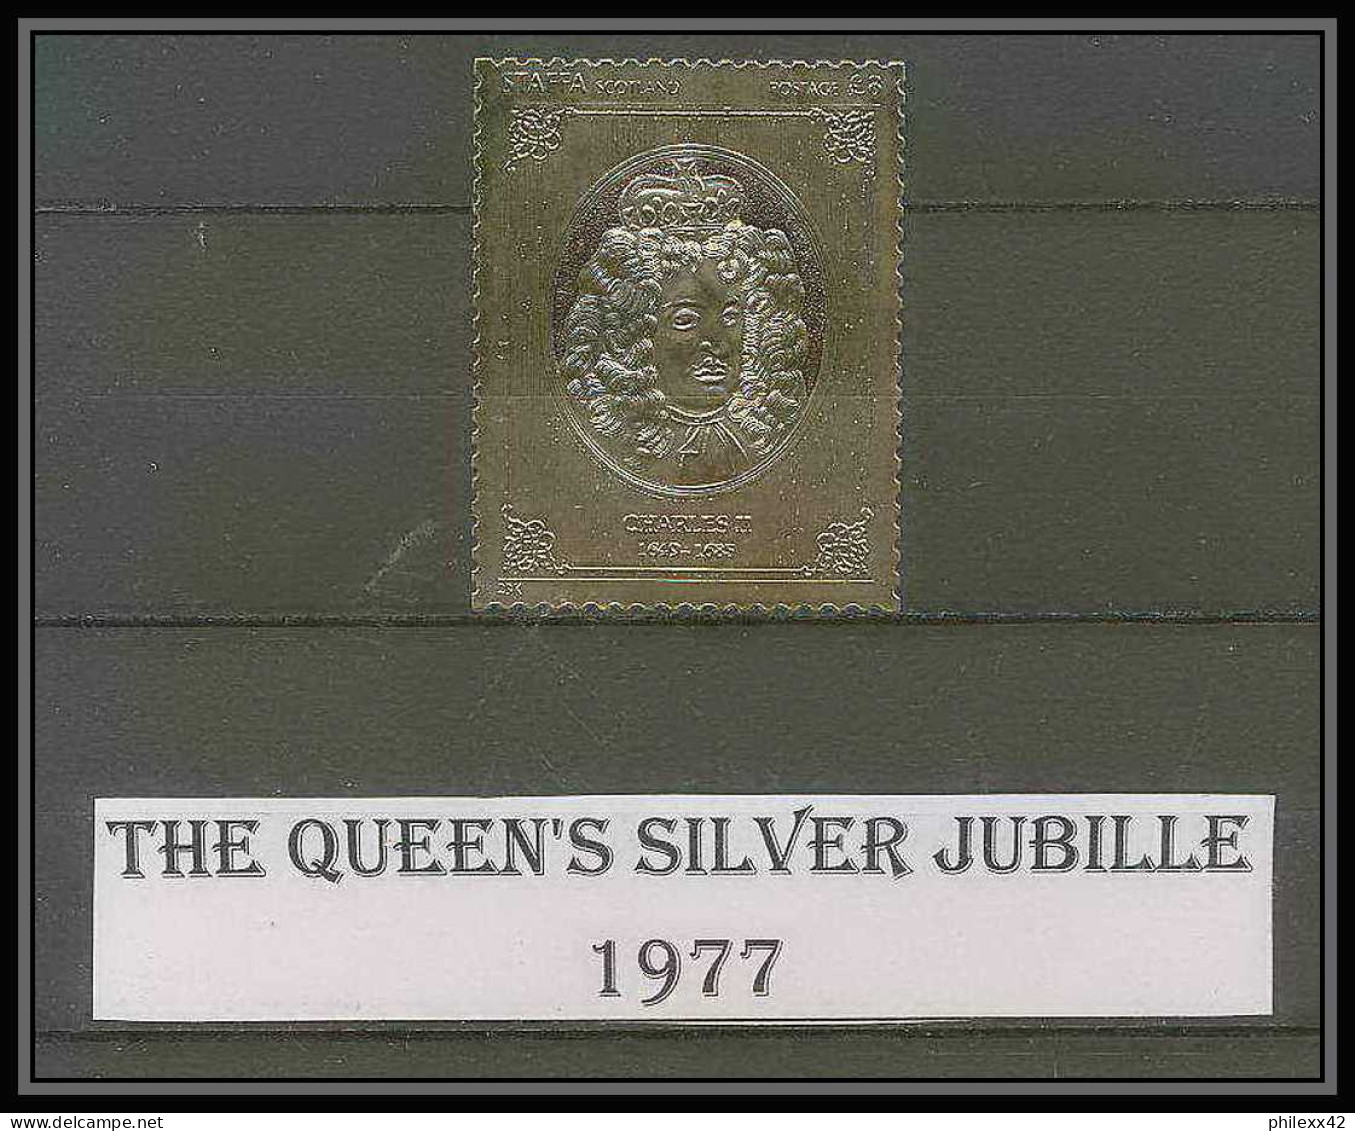 461 Staffa Scotland The Queen's Silver Jubilee 1977 OR Gold Stamps Monarchy United Kingdom Charles 2 Type 1 Neuf** Mnh - Emissions Locales